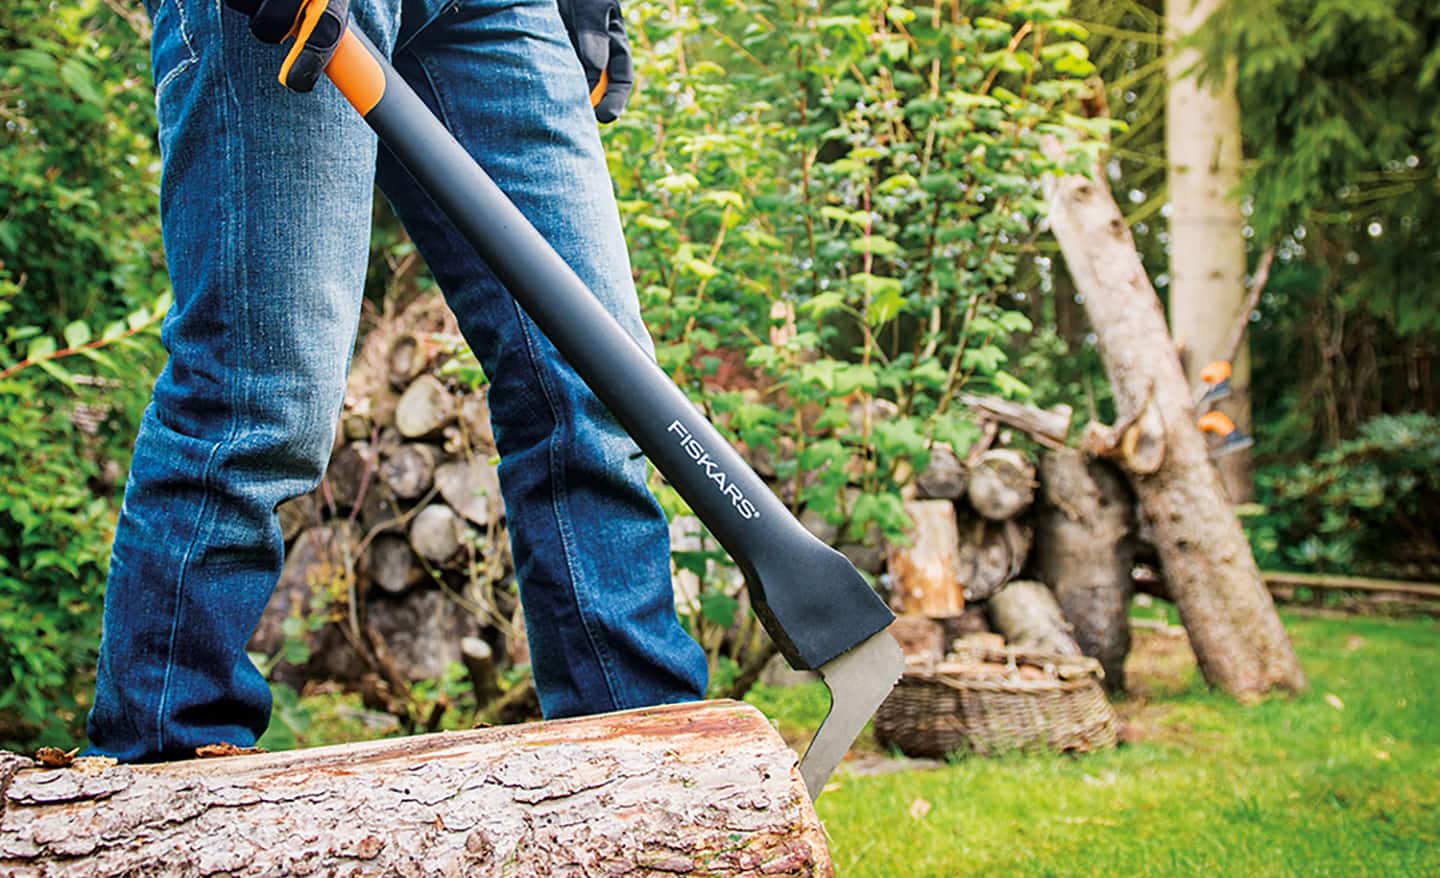 A man uses an axe striking tool to split wood and for yard work.